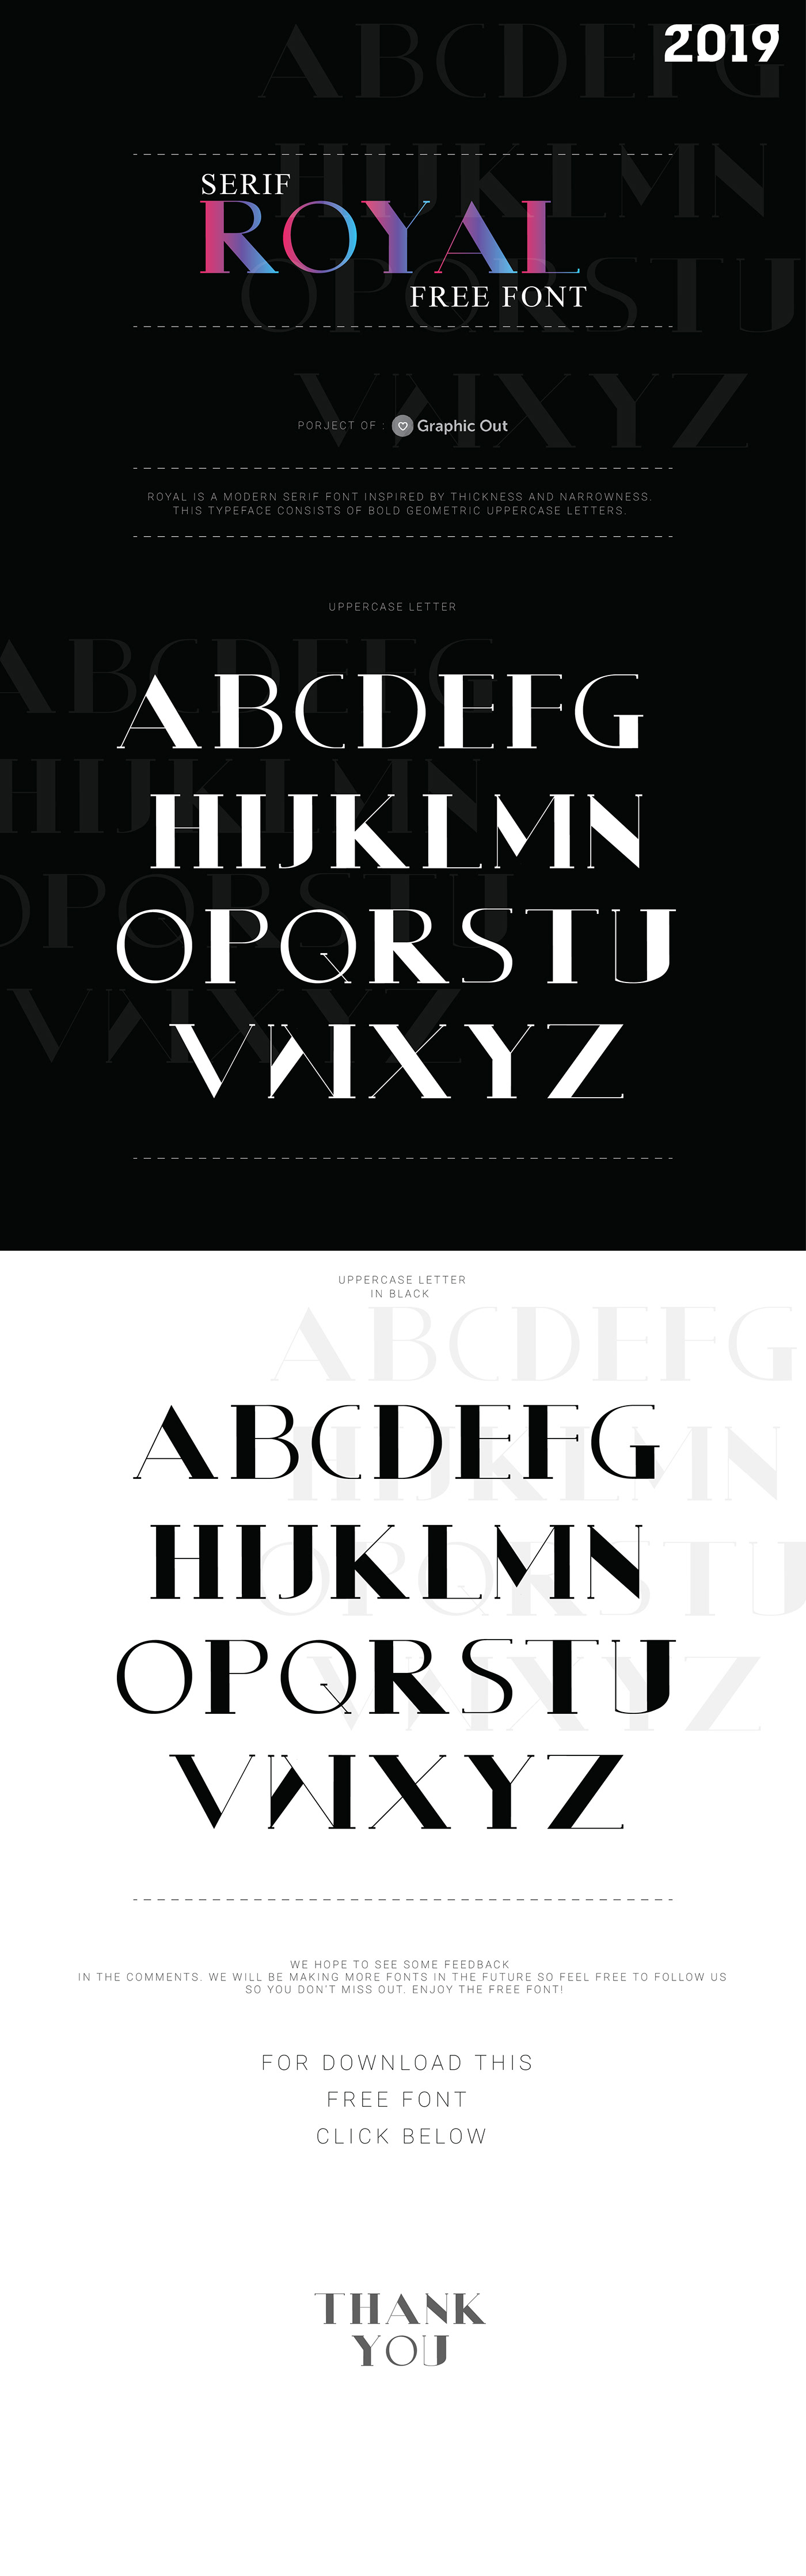 royal font Free font Behance typography   Graphic Out Graphicout font design vector graphic